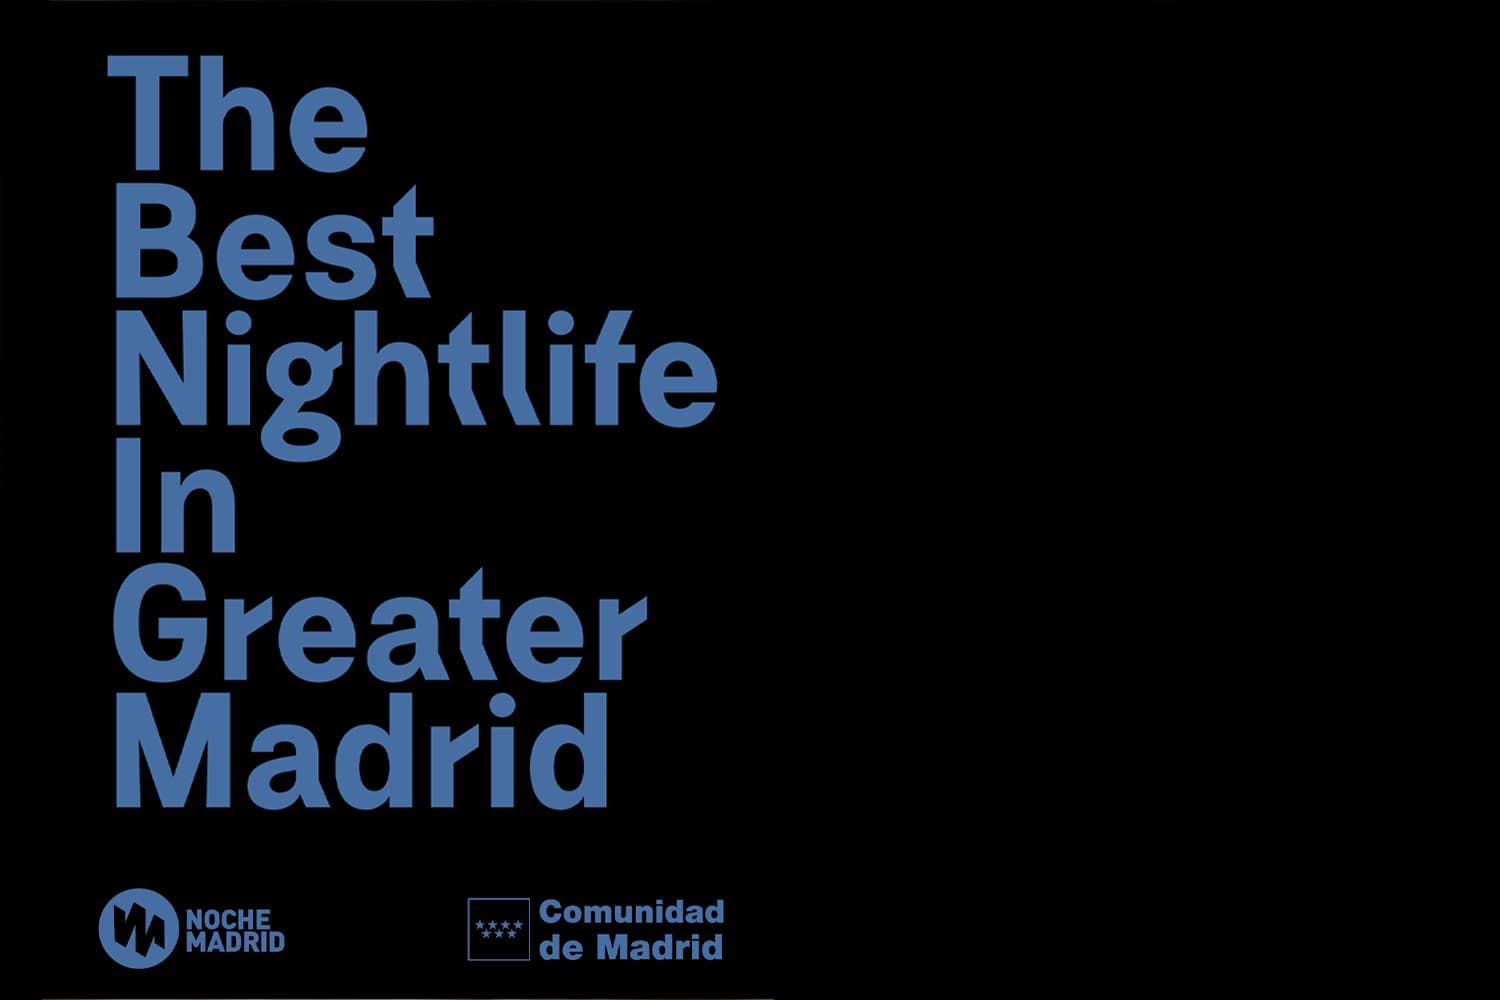 The guide to the best leisure and nightlife entertainment venues in the Community of Madrid